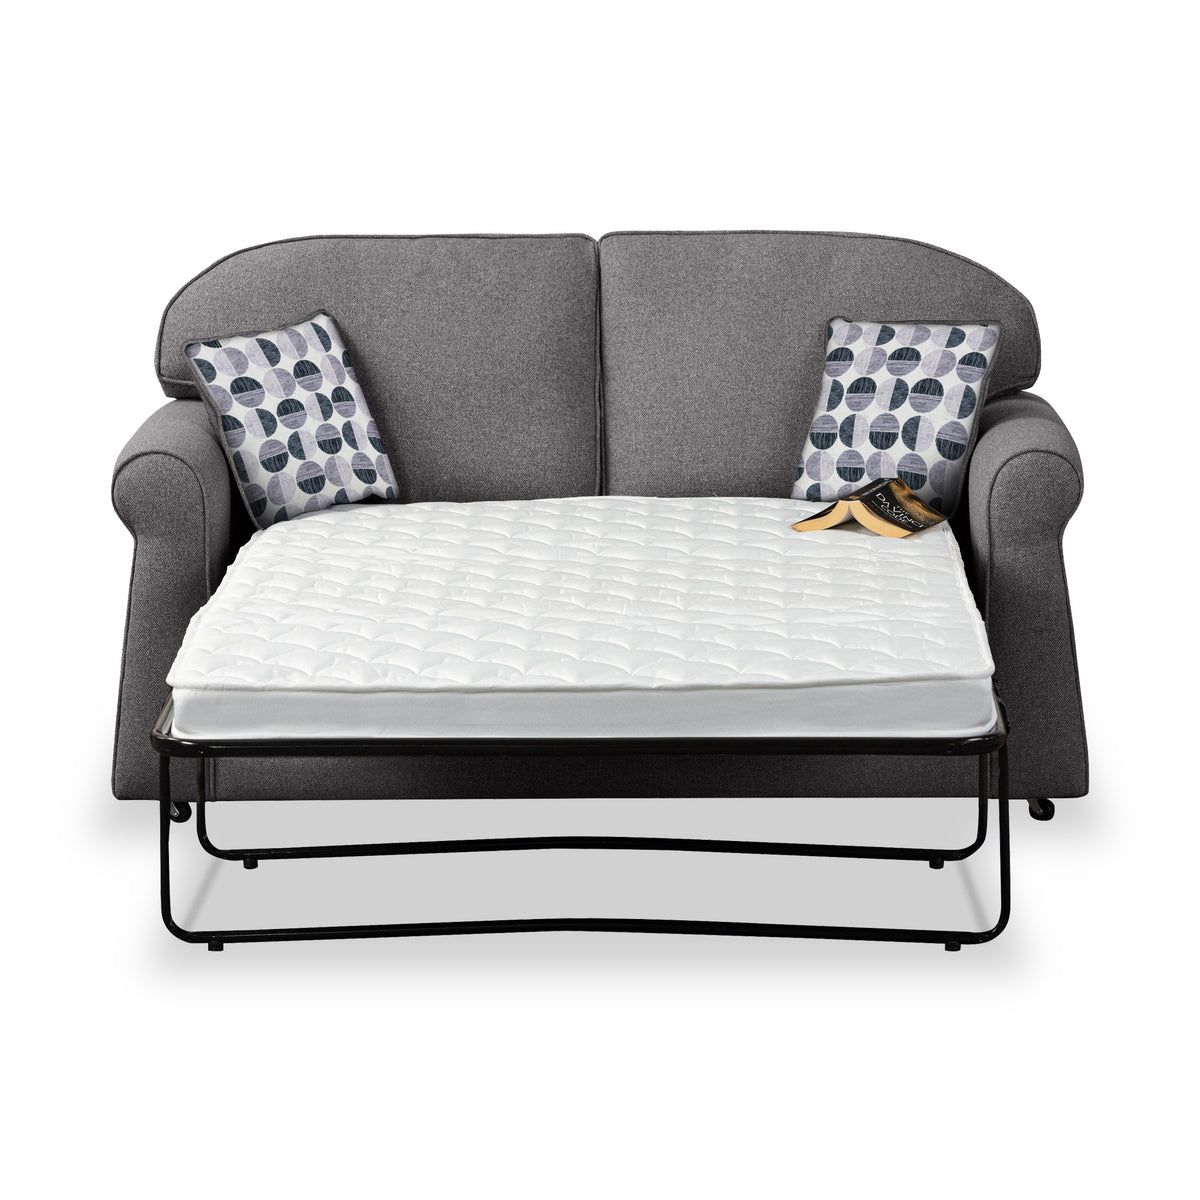 Giselle Charcoal Soft Weave 2 Seater Sofabed with Mono Scatter Cushions from Roseland Furniture